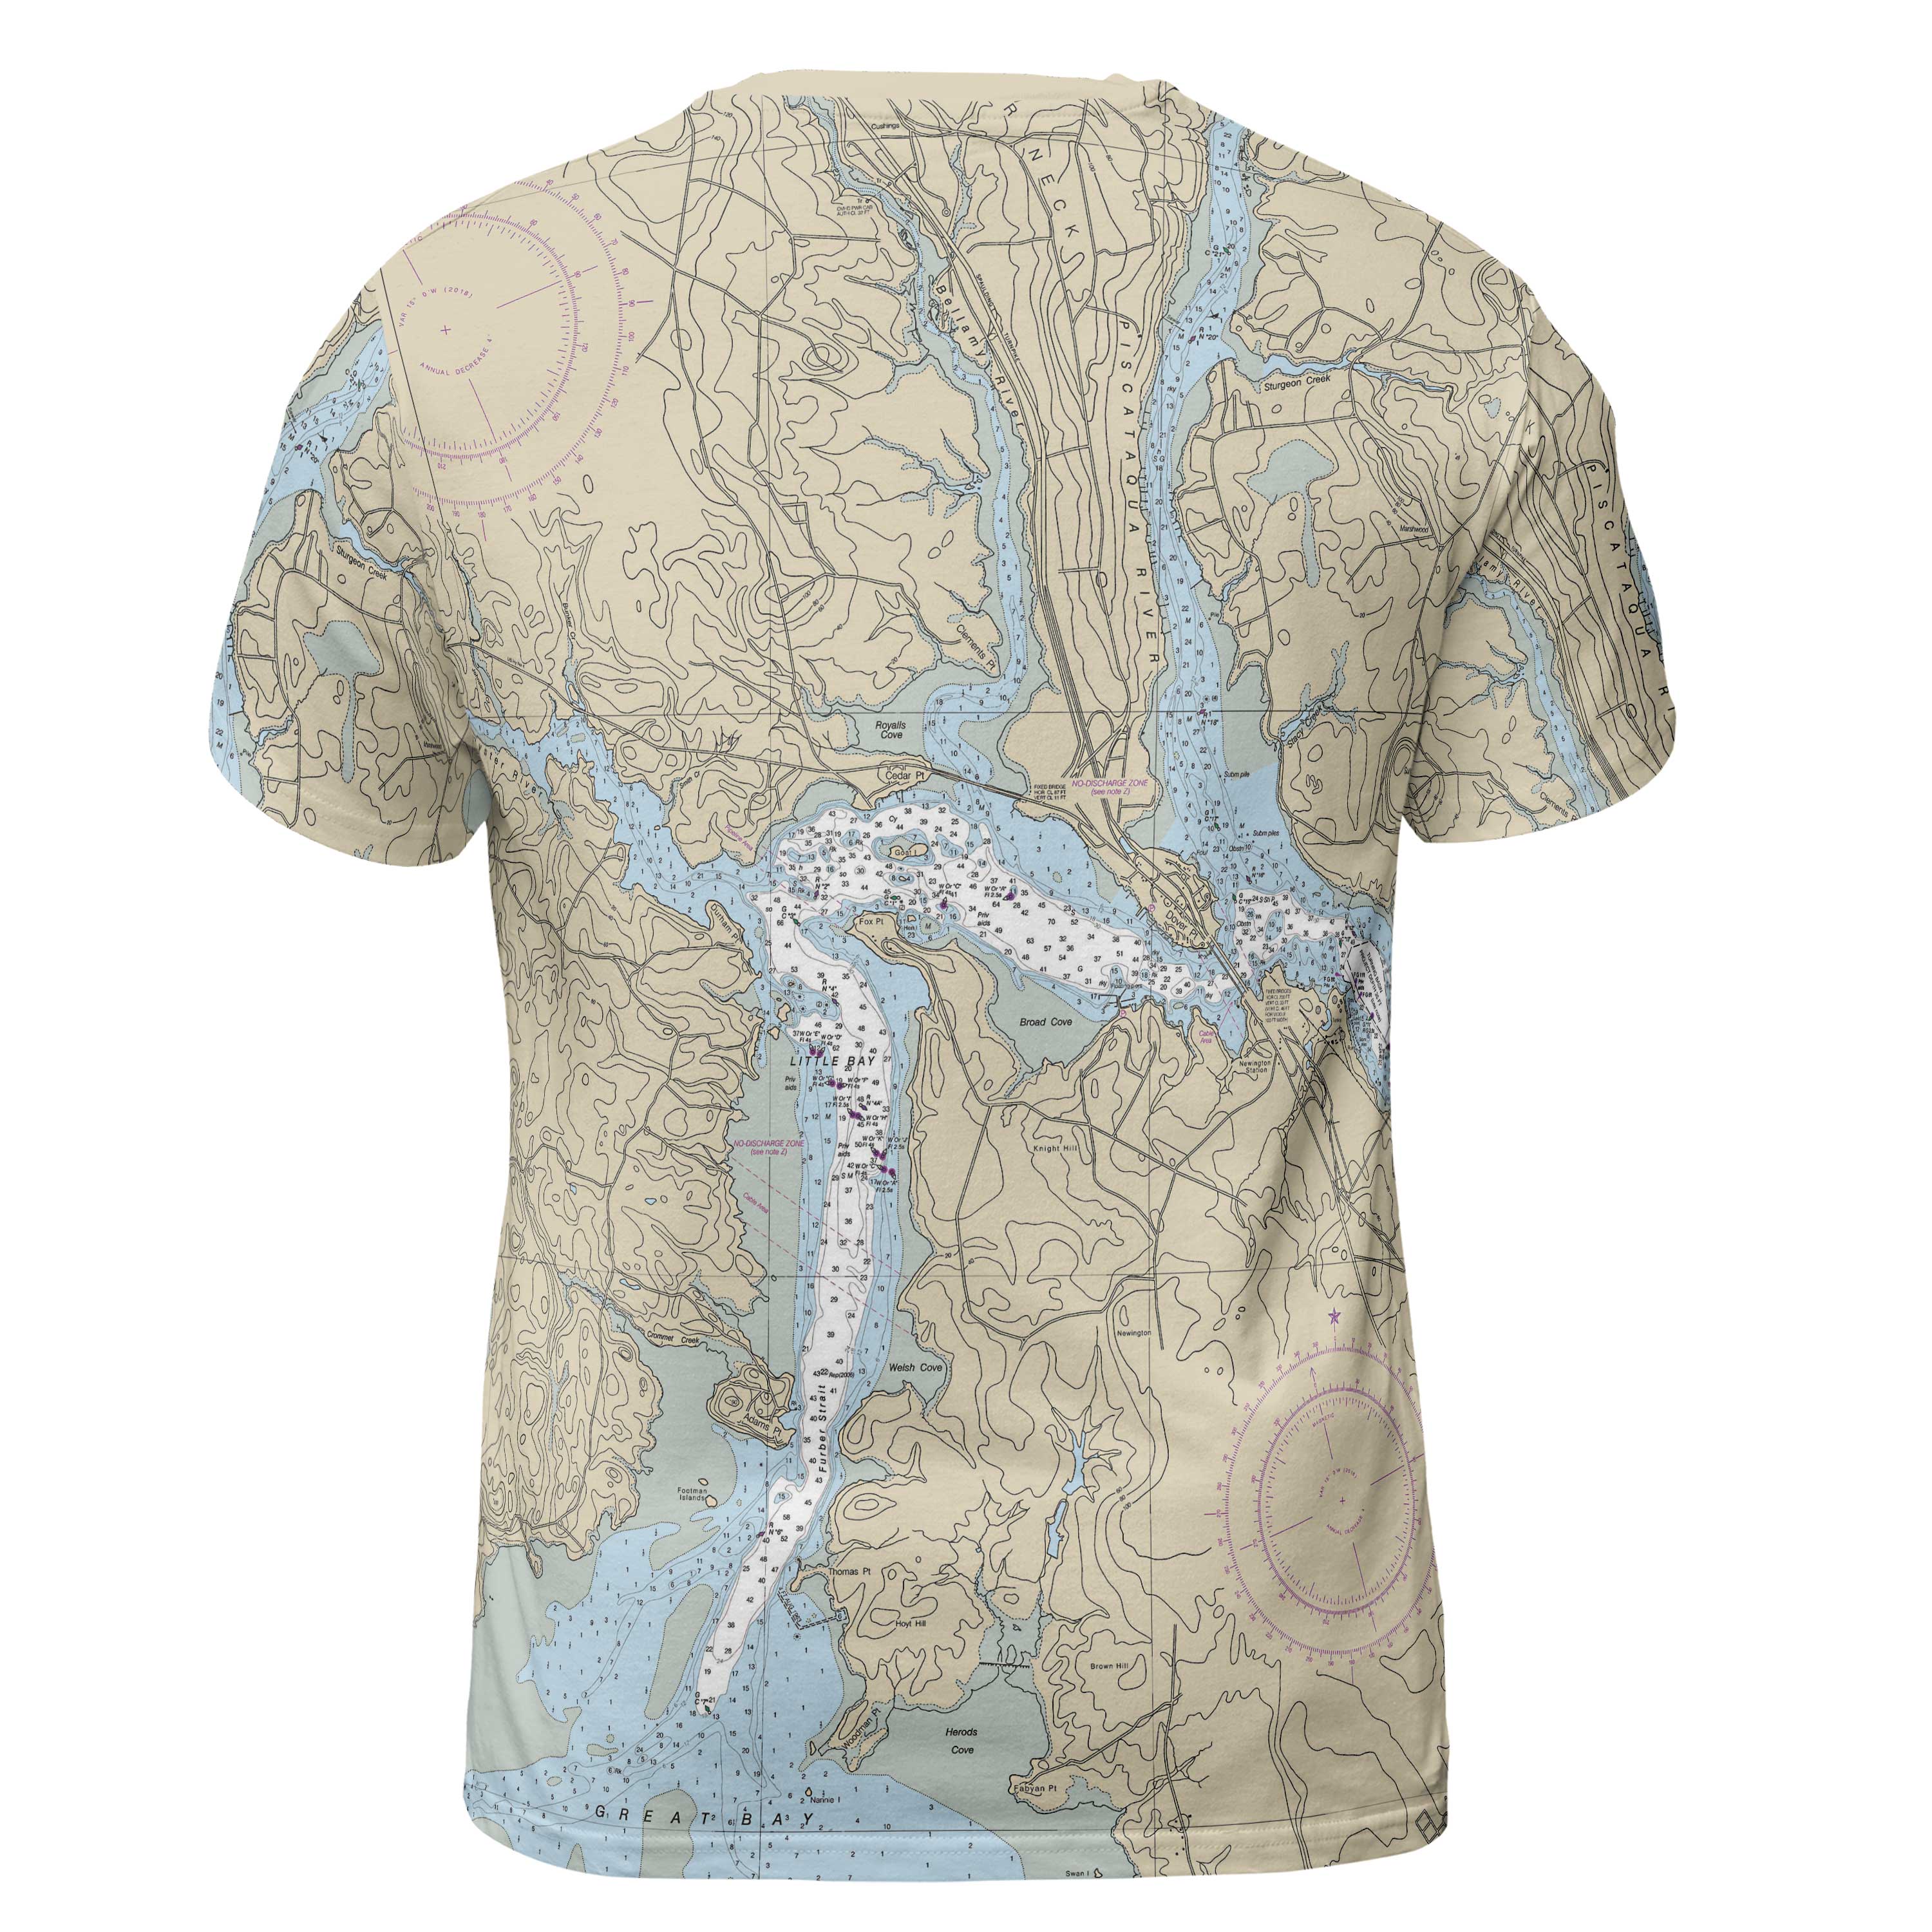 The Piscataqua River to Great Bay Short Sleeve Performance Tee